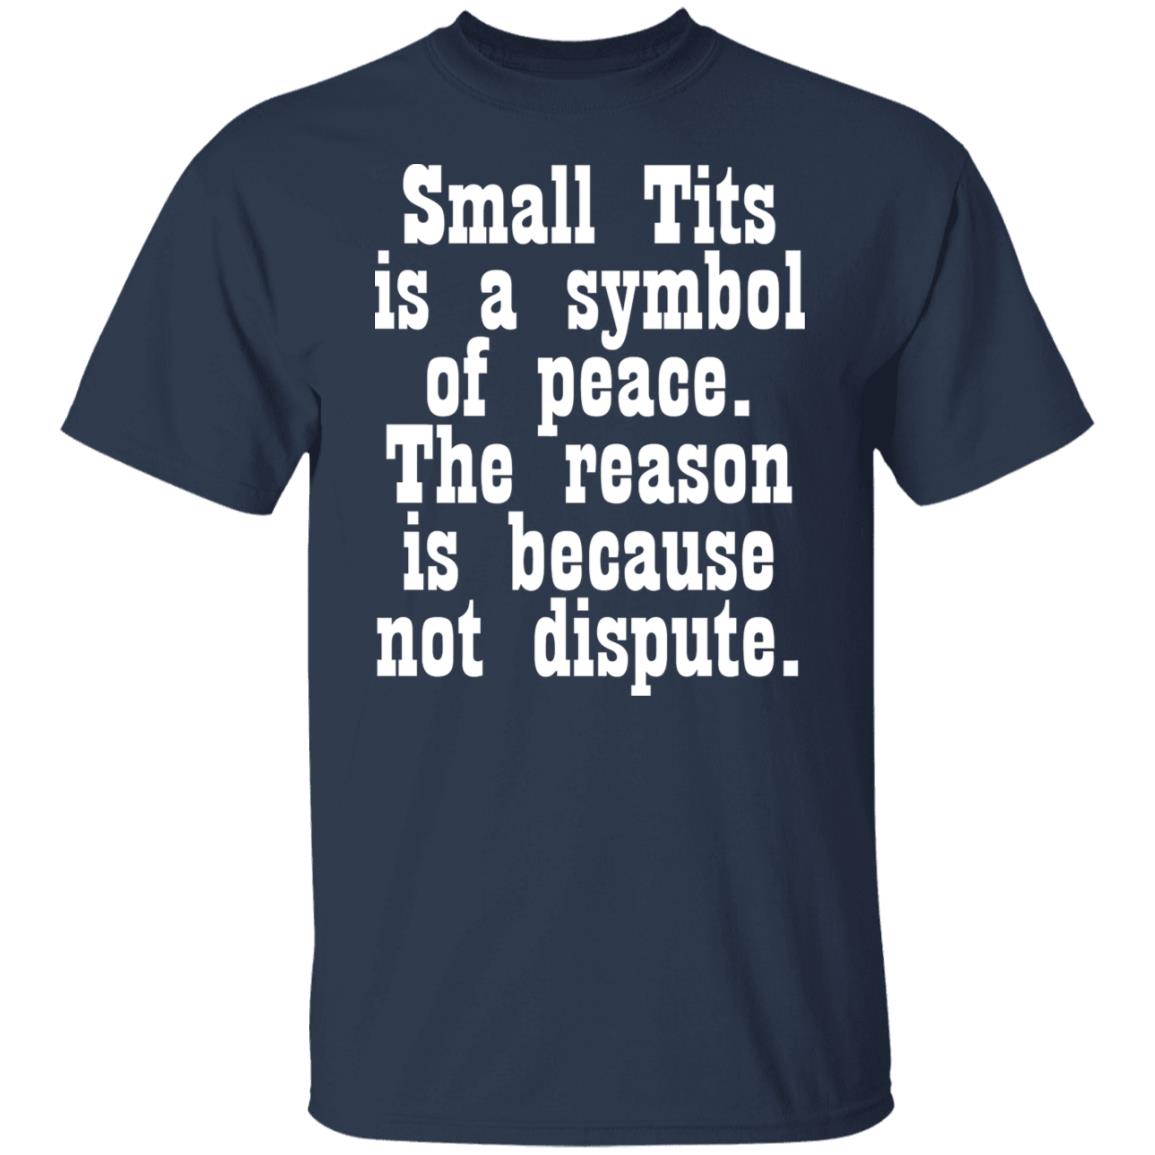 Small Tits Is A Symbol Of Peace Shirt